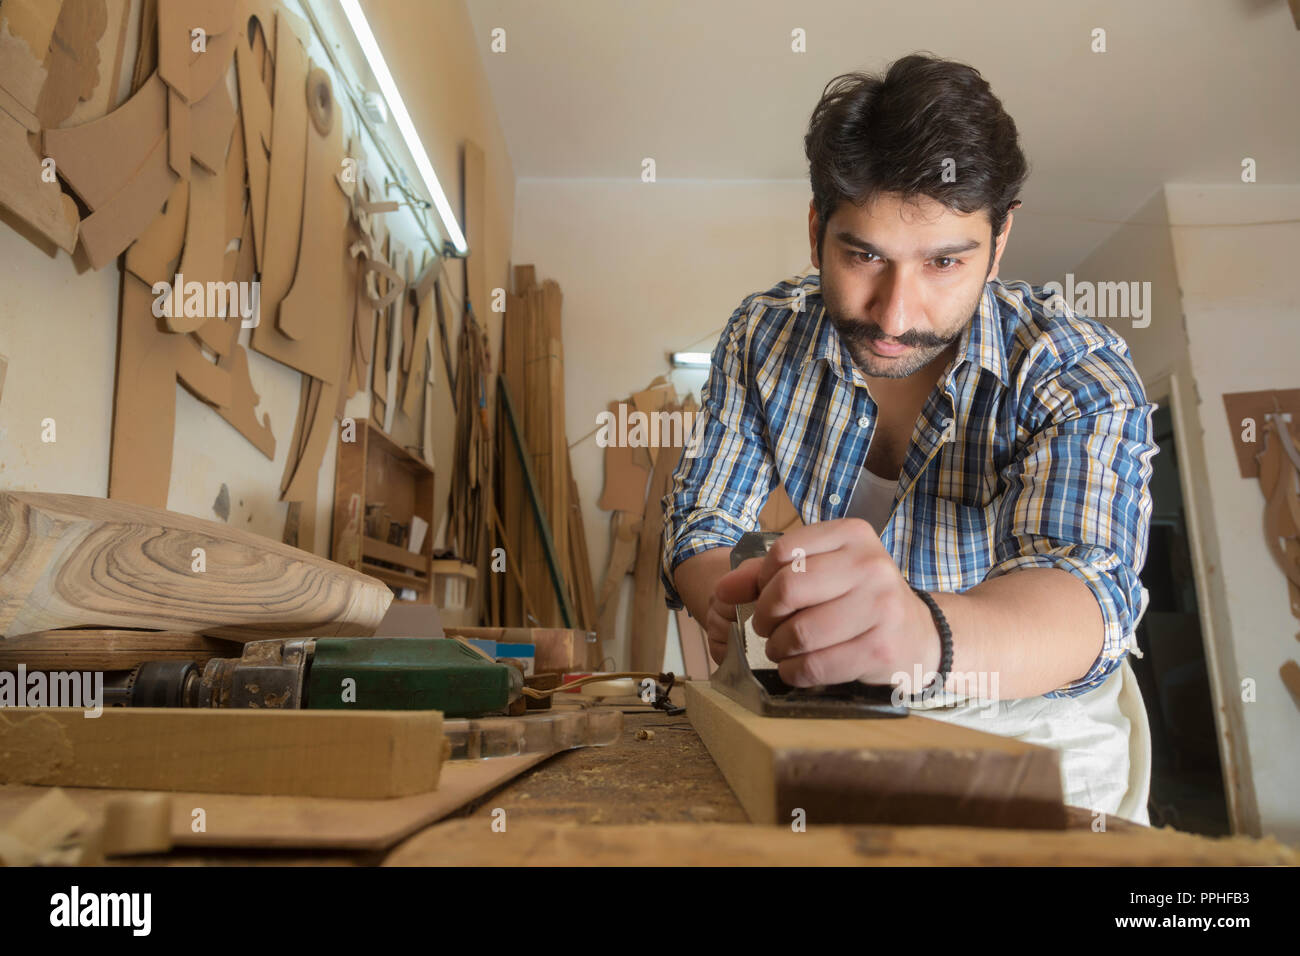 Carpenter using a scraper blade to smoothen wooden log on his work bench. Stock Photo